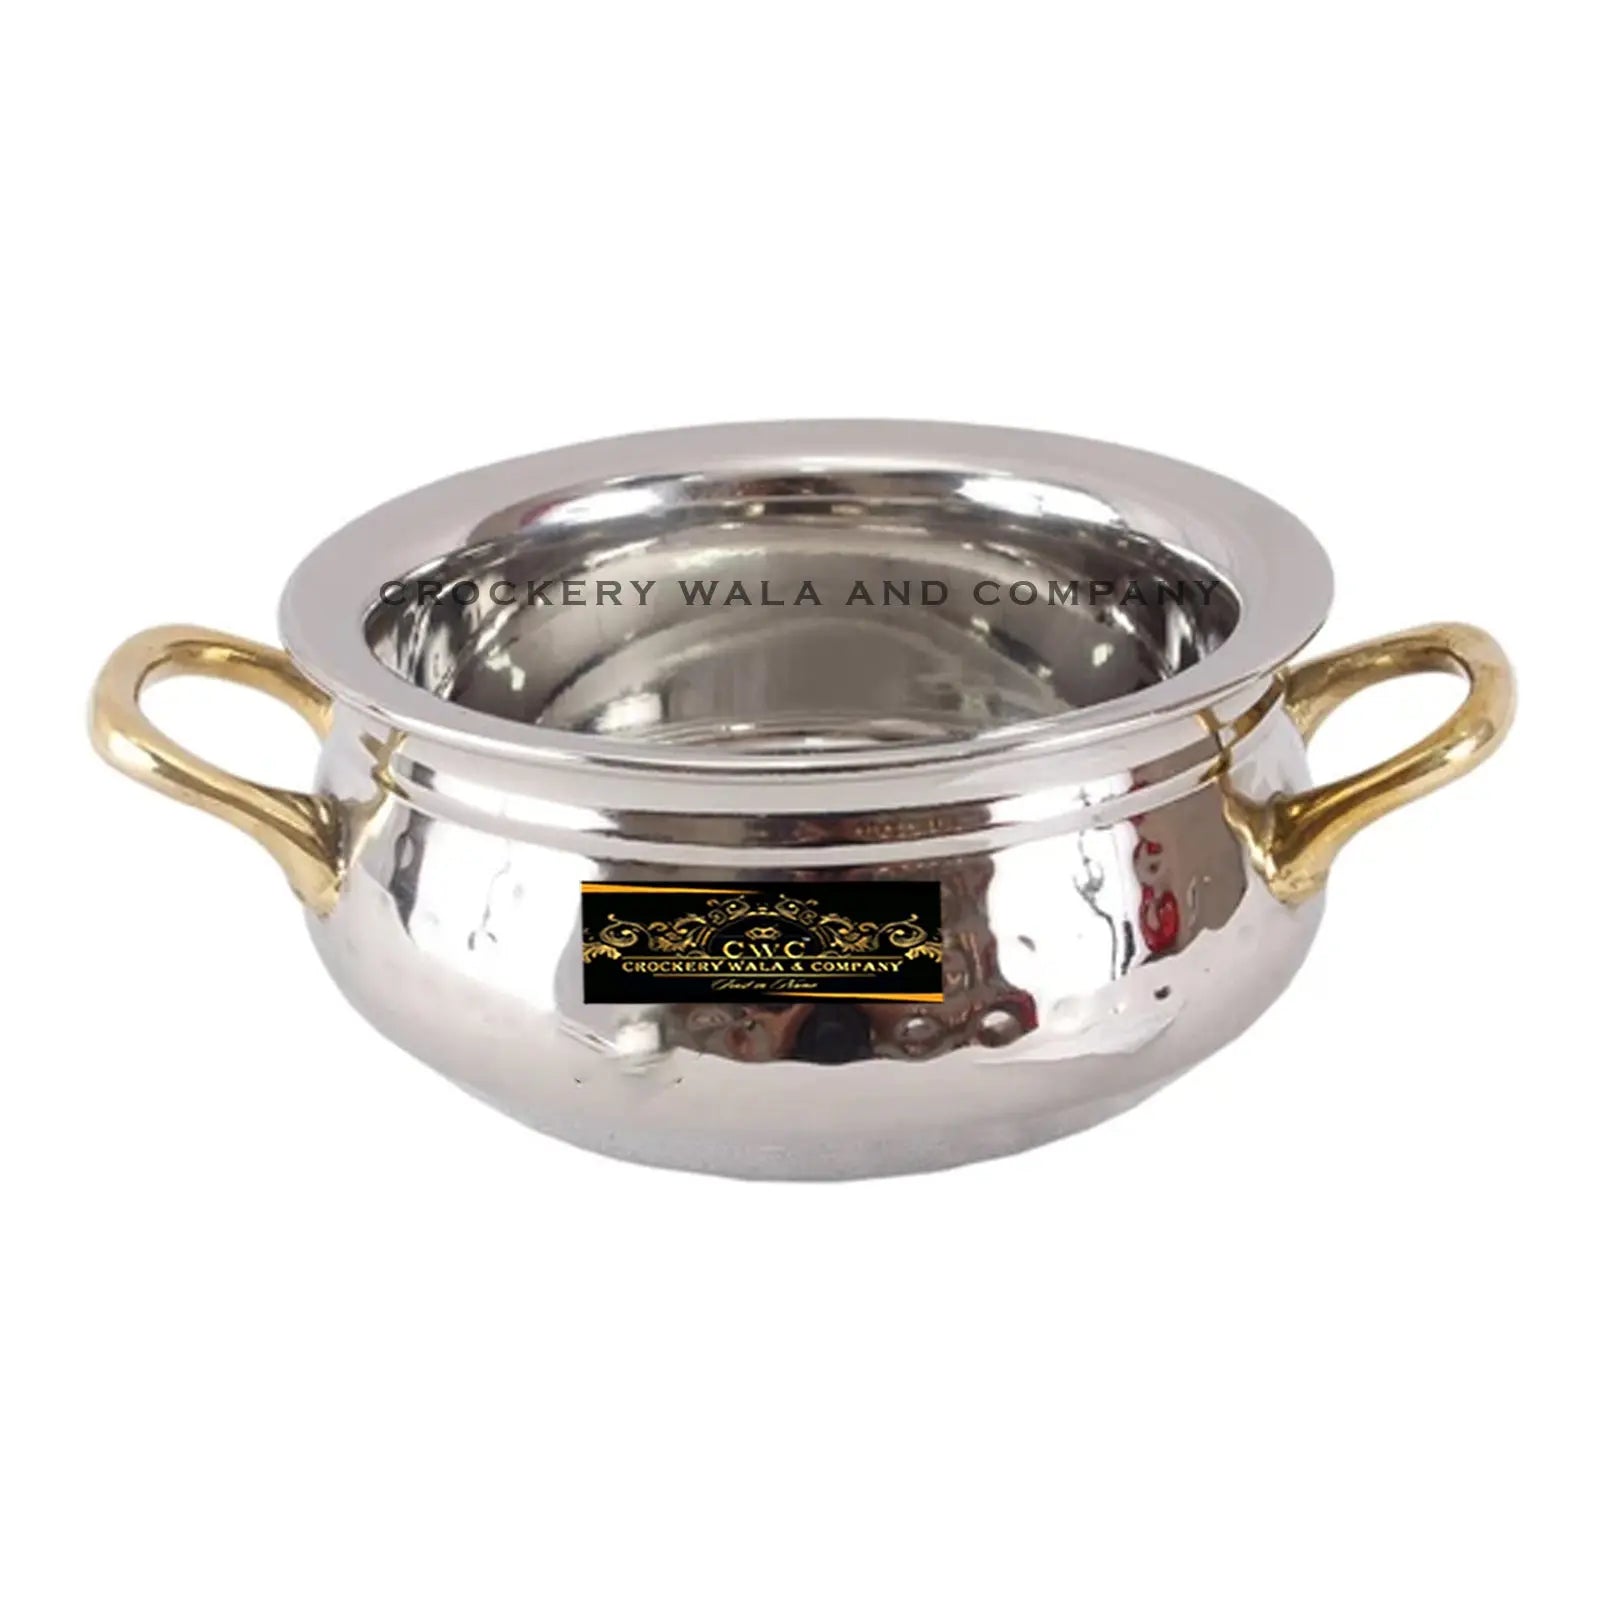 Crockery Wala And Company Steel Handi Hammered Design Bowl Handi For Serving With Brass Handles 400 ML - CROCKERY WALA AND COMPANY 